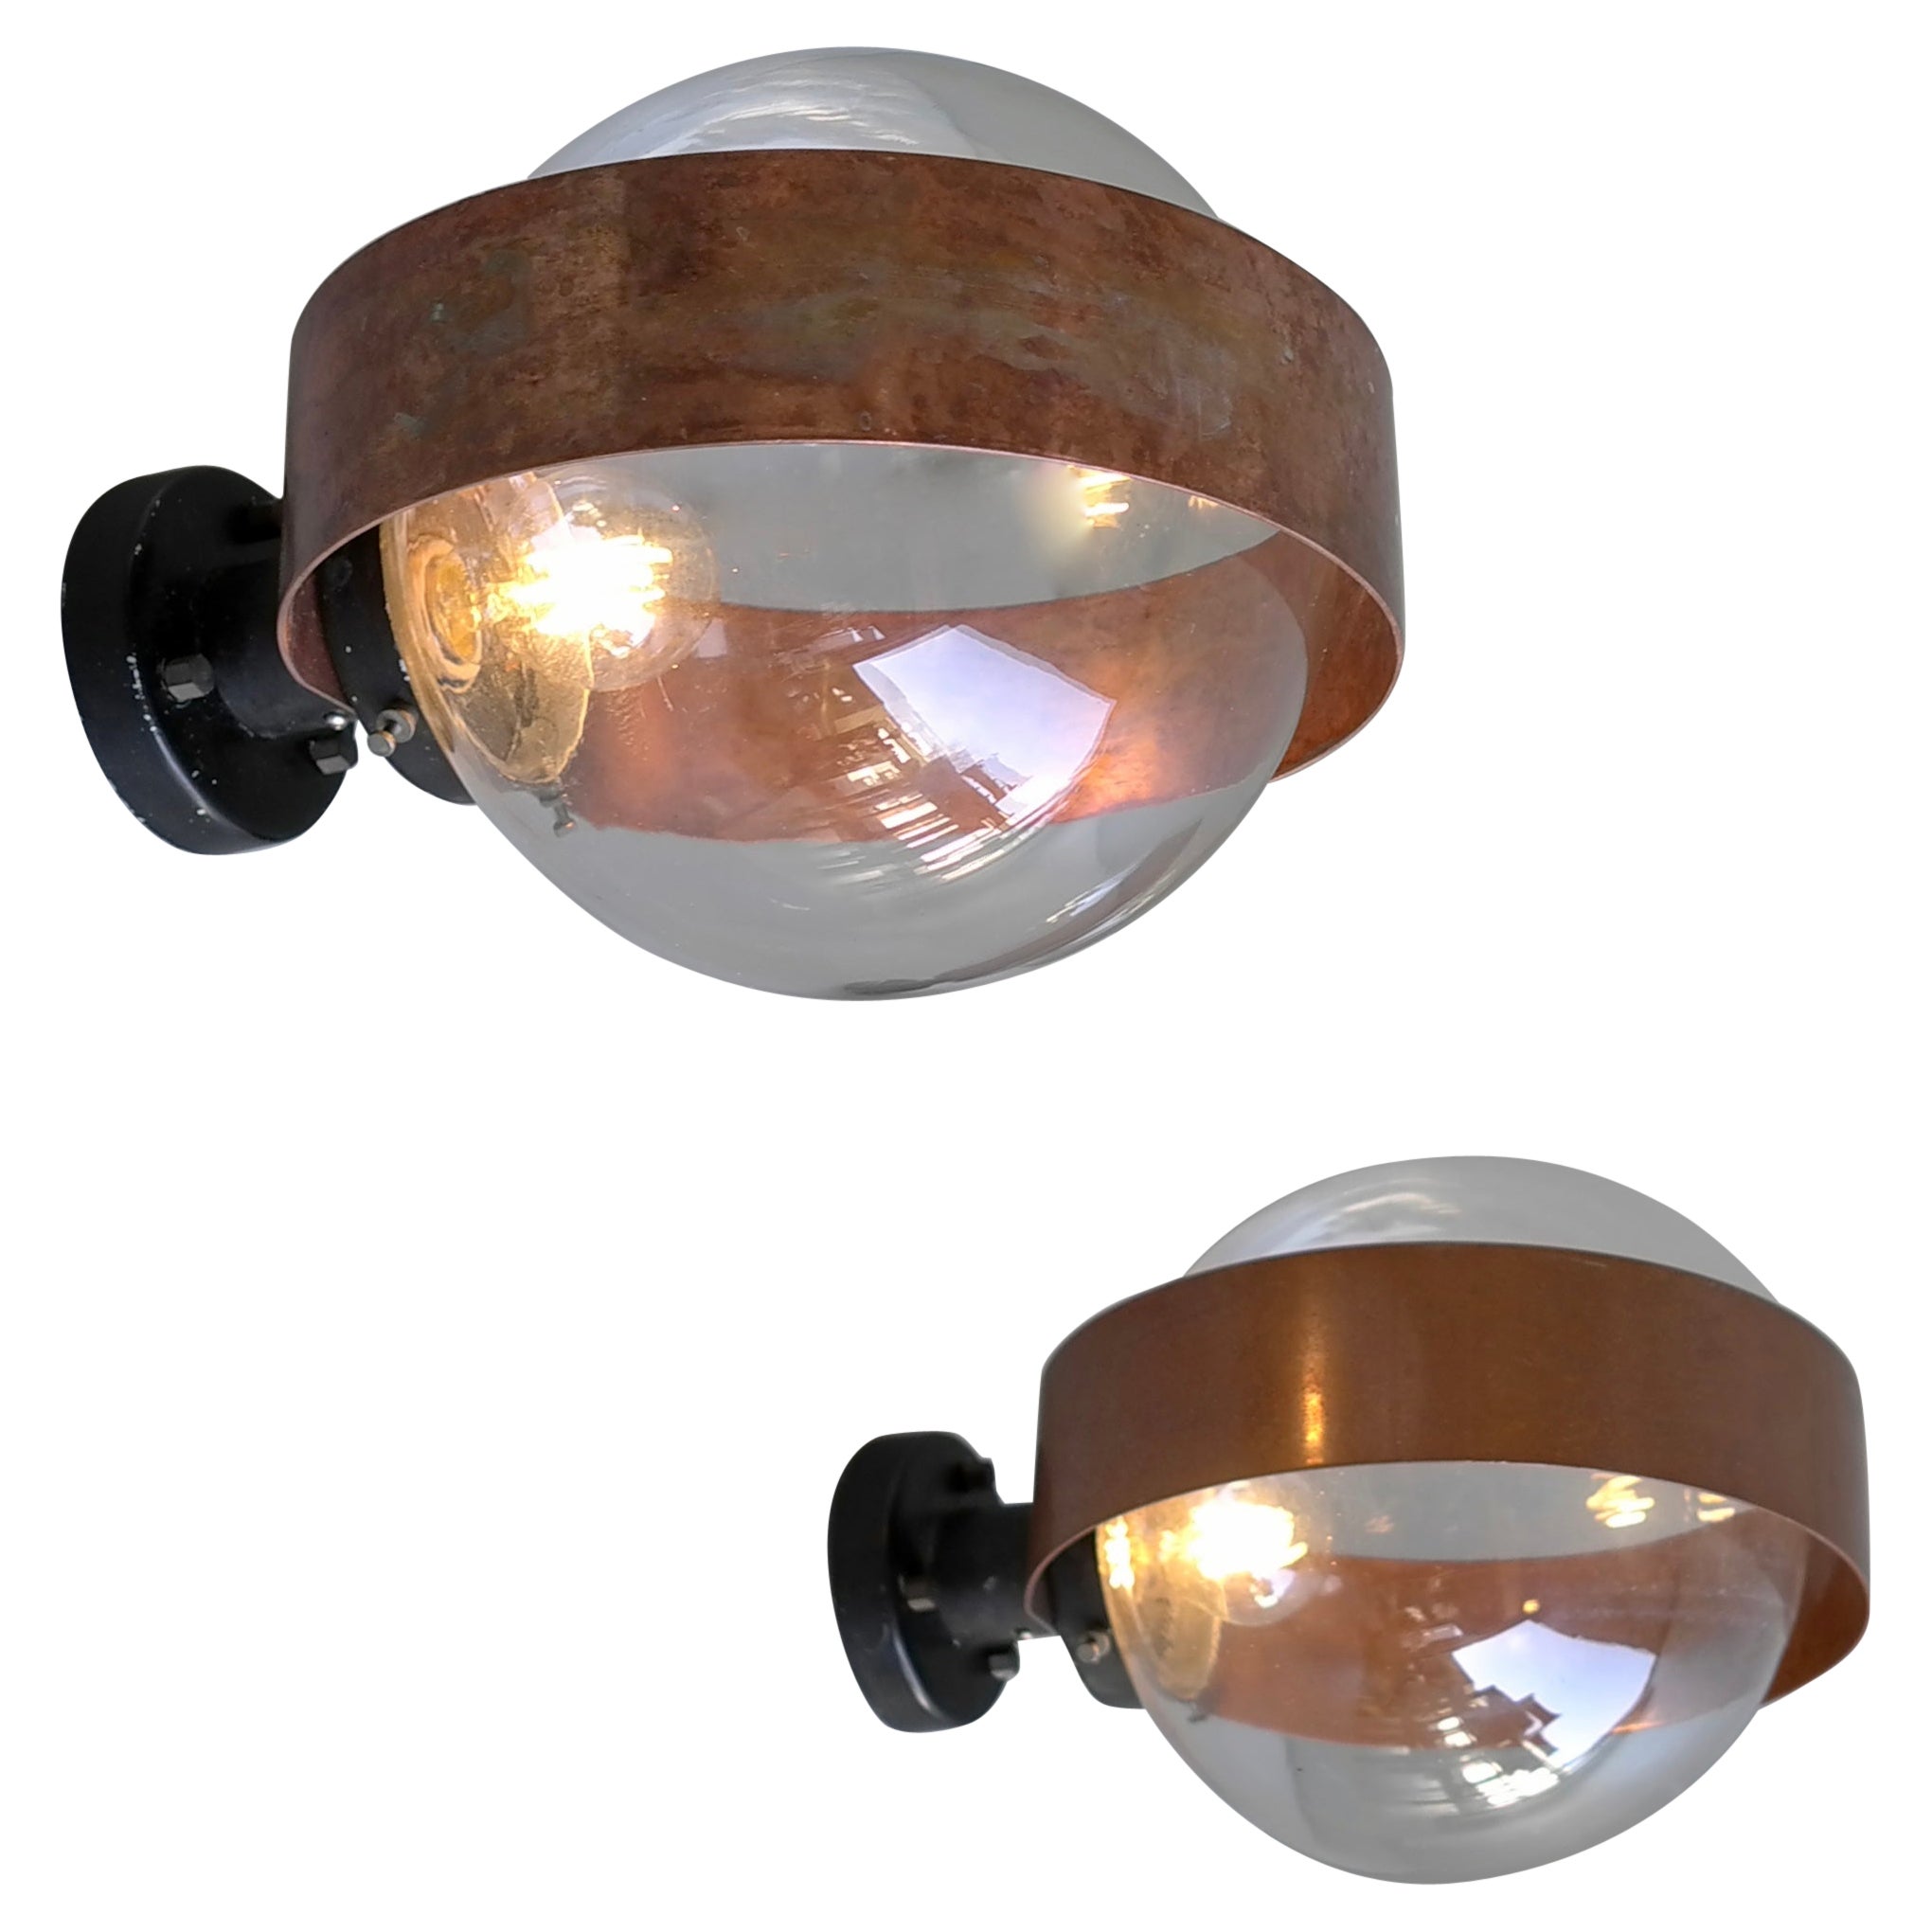 Pair of Scandinavian Glass Ball Wall lamps with Copper Patina Rims, 1960's For Sale